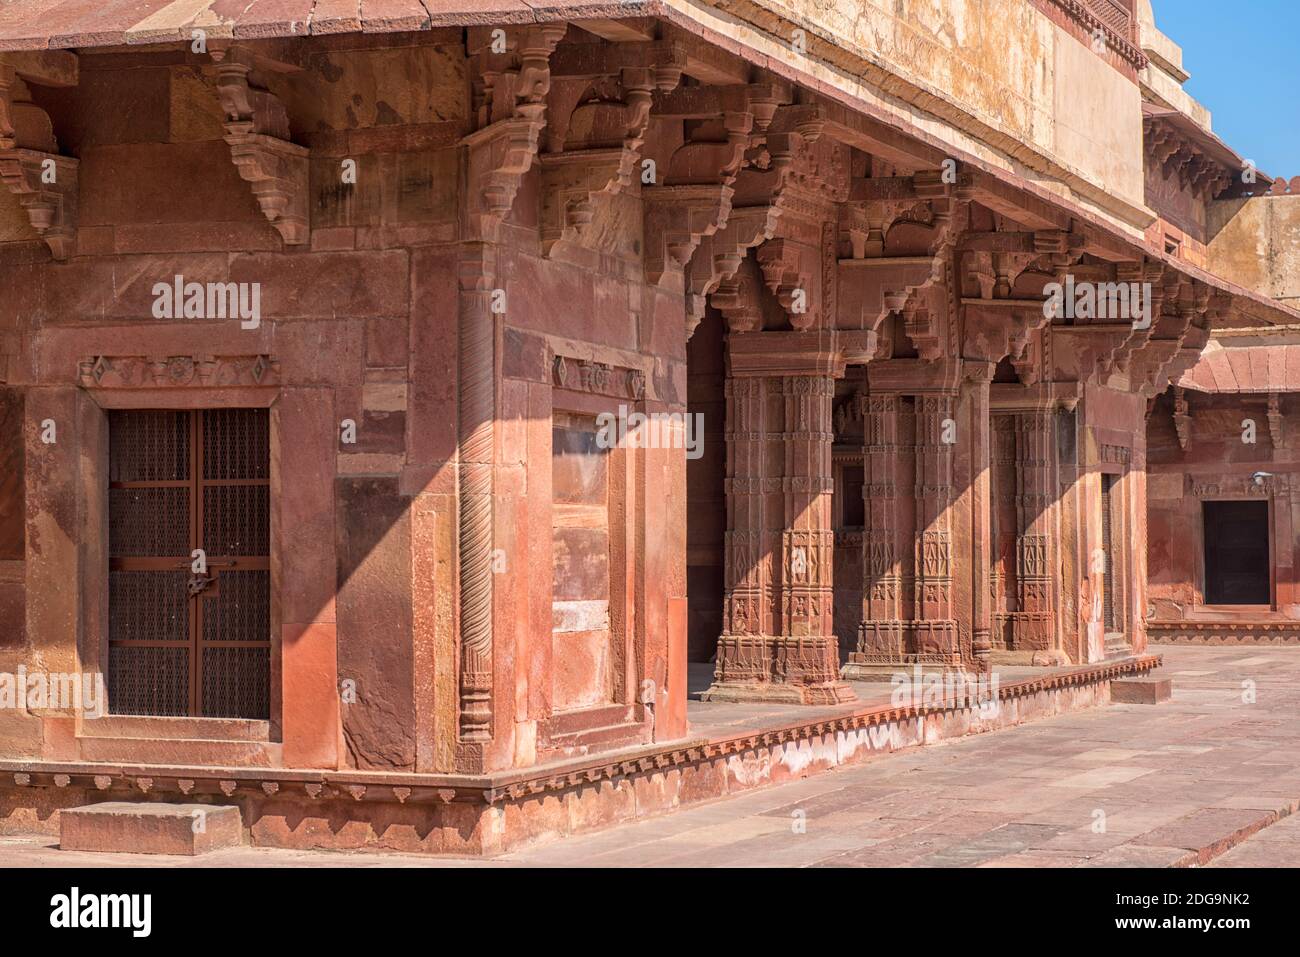 Red Fort of Agra. UNESCO World Heritage site. Stock Photo